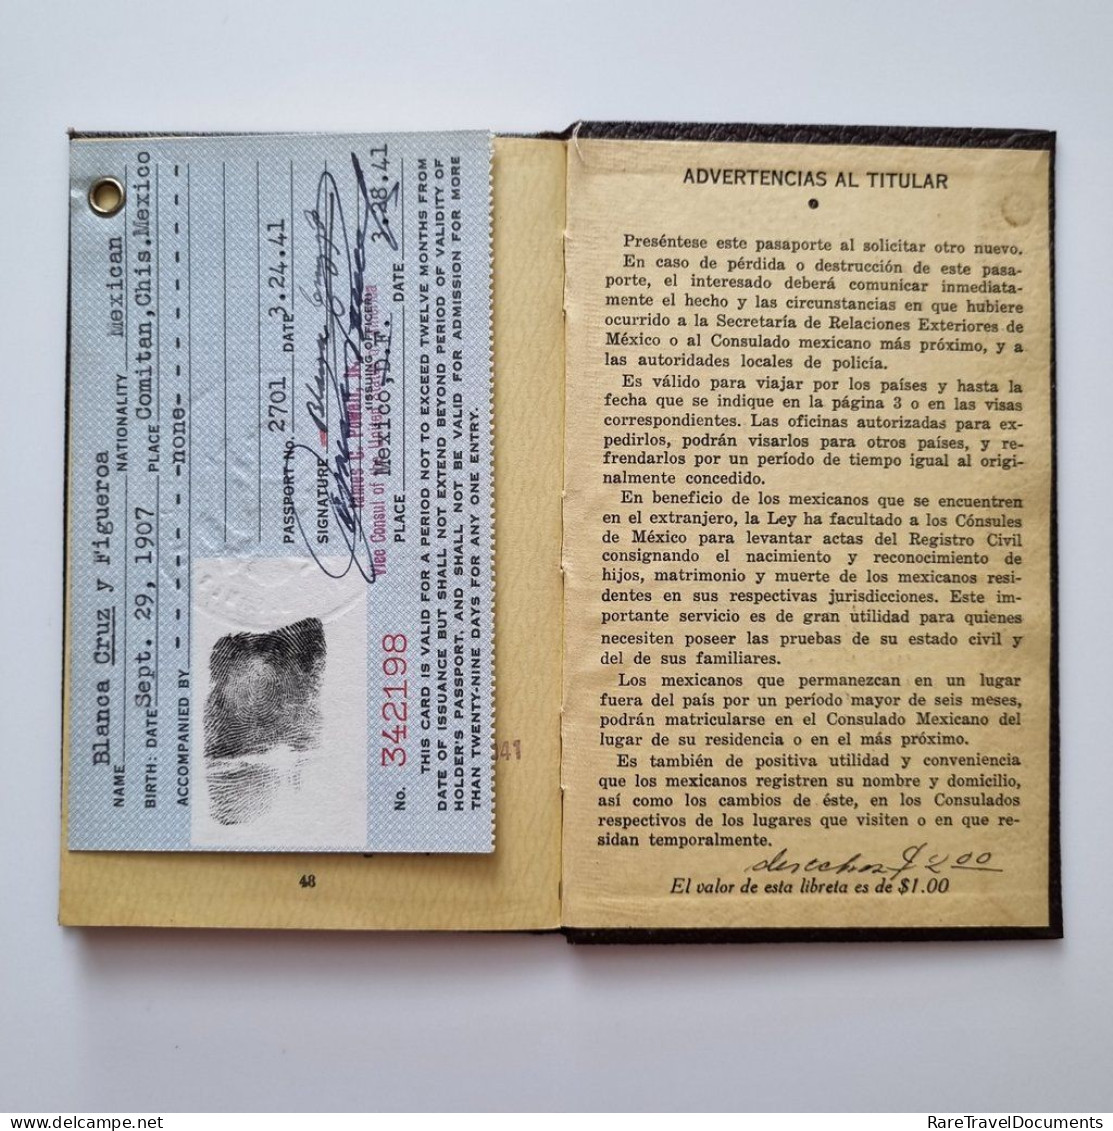 Fantastic MEXICO 1941 Passport of a beautiful woman - Condition! - Free Shipping!